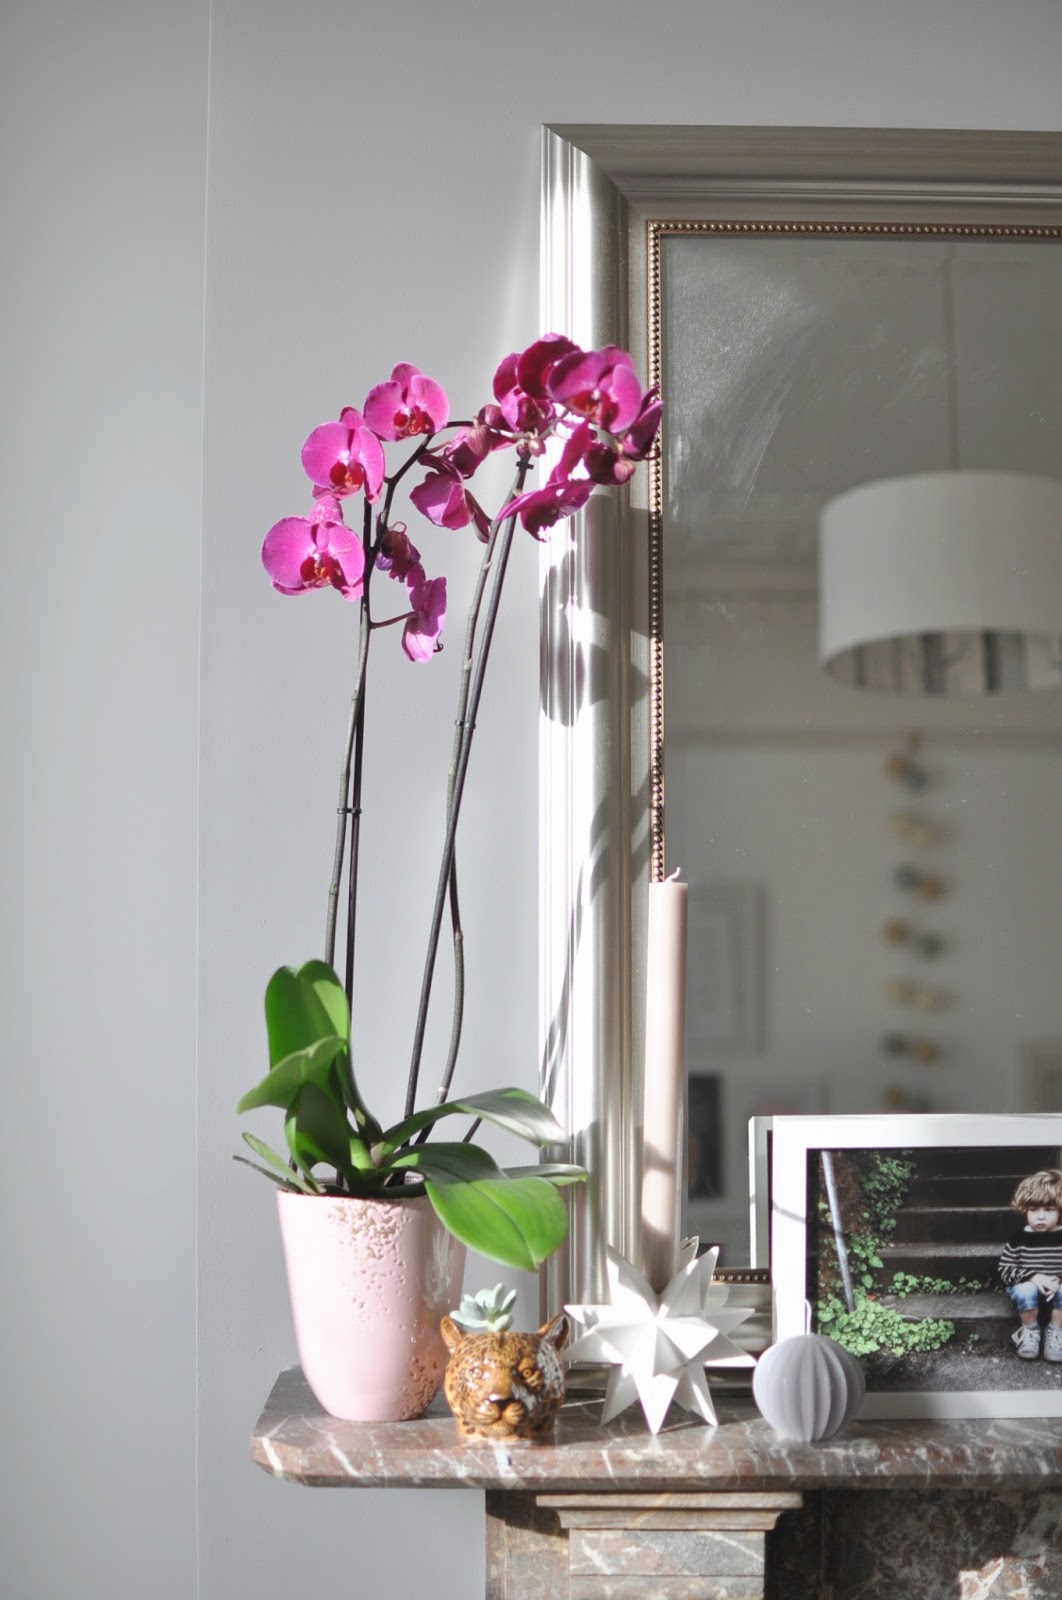 orchid care, orchid plant care, phalaenopsis, how to care for orchids, how to grow orchids, looking after orchids, plant gang, interior styling, spring, blooms, flowers